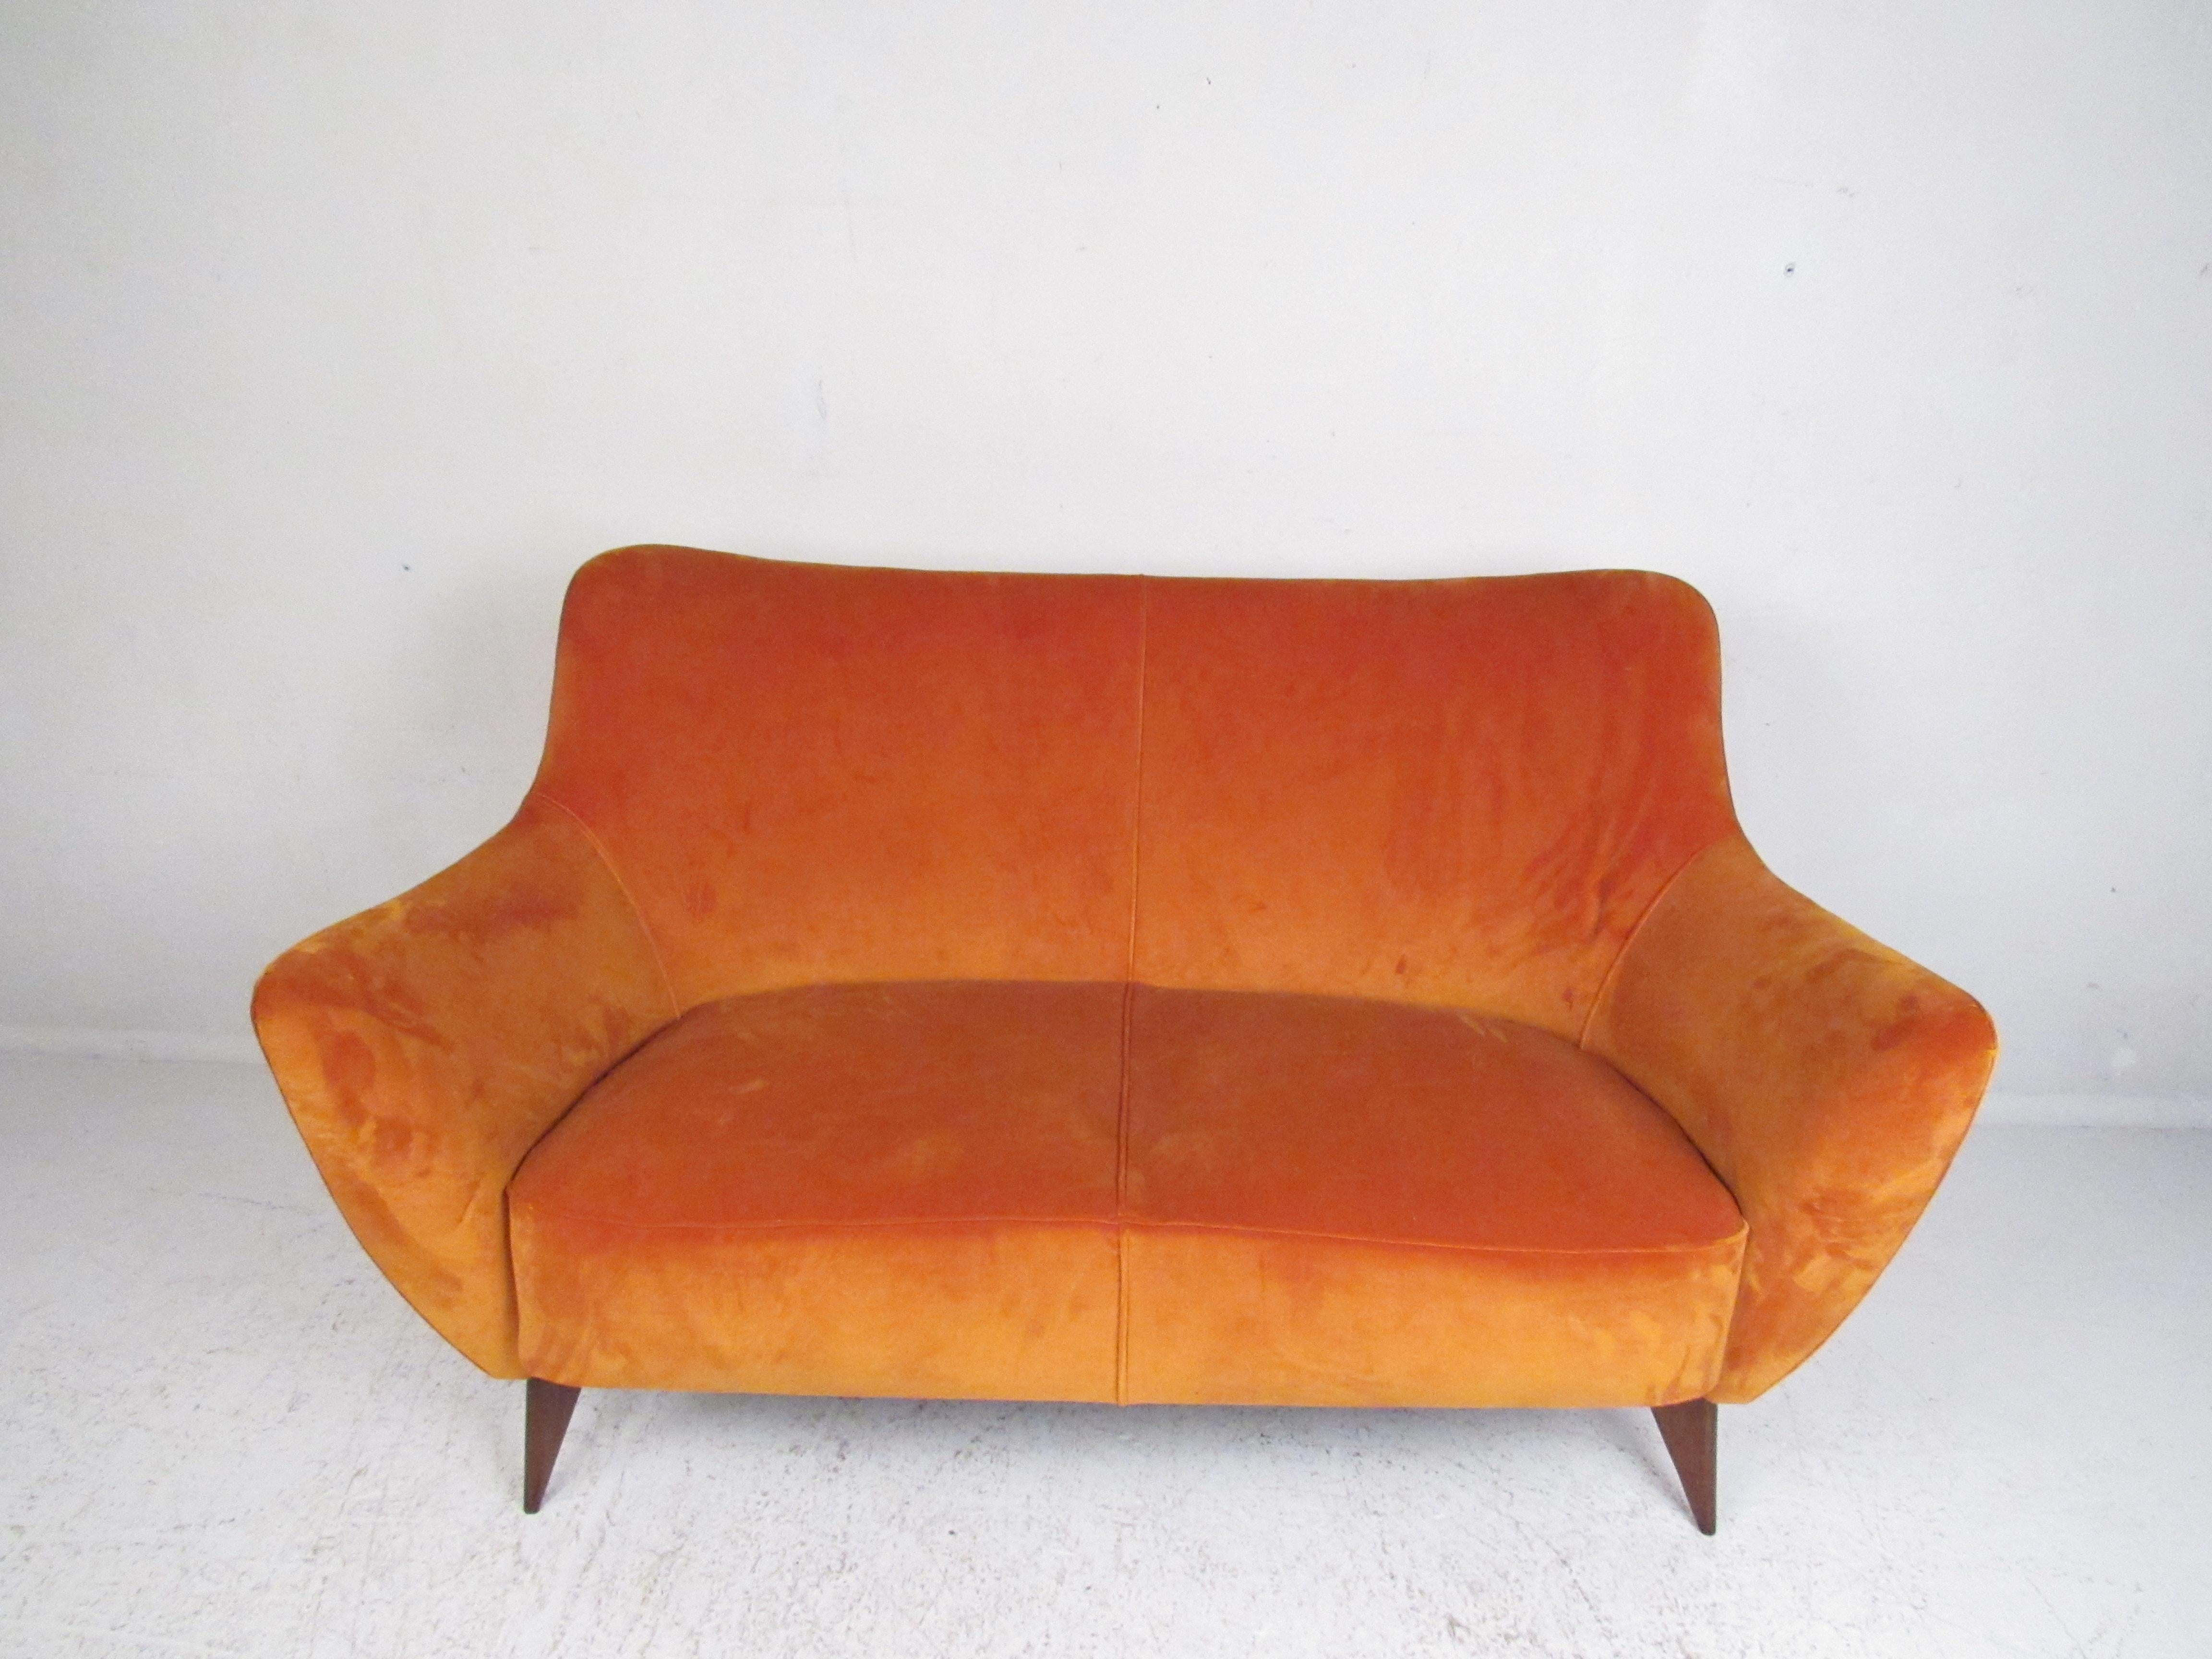 This elegant vintage modern sofa features splayed walnut legs, winged armrests, and a thick padded seat. The elegant orange velour upholstery makes this piece pop in any seating arrangement. In the style of Gio Ponti. Please confirm item location